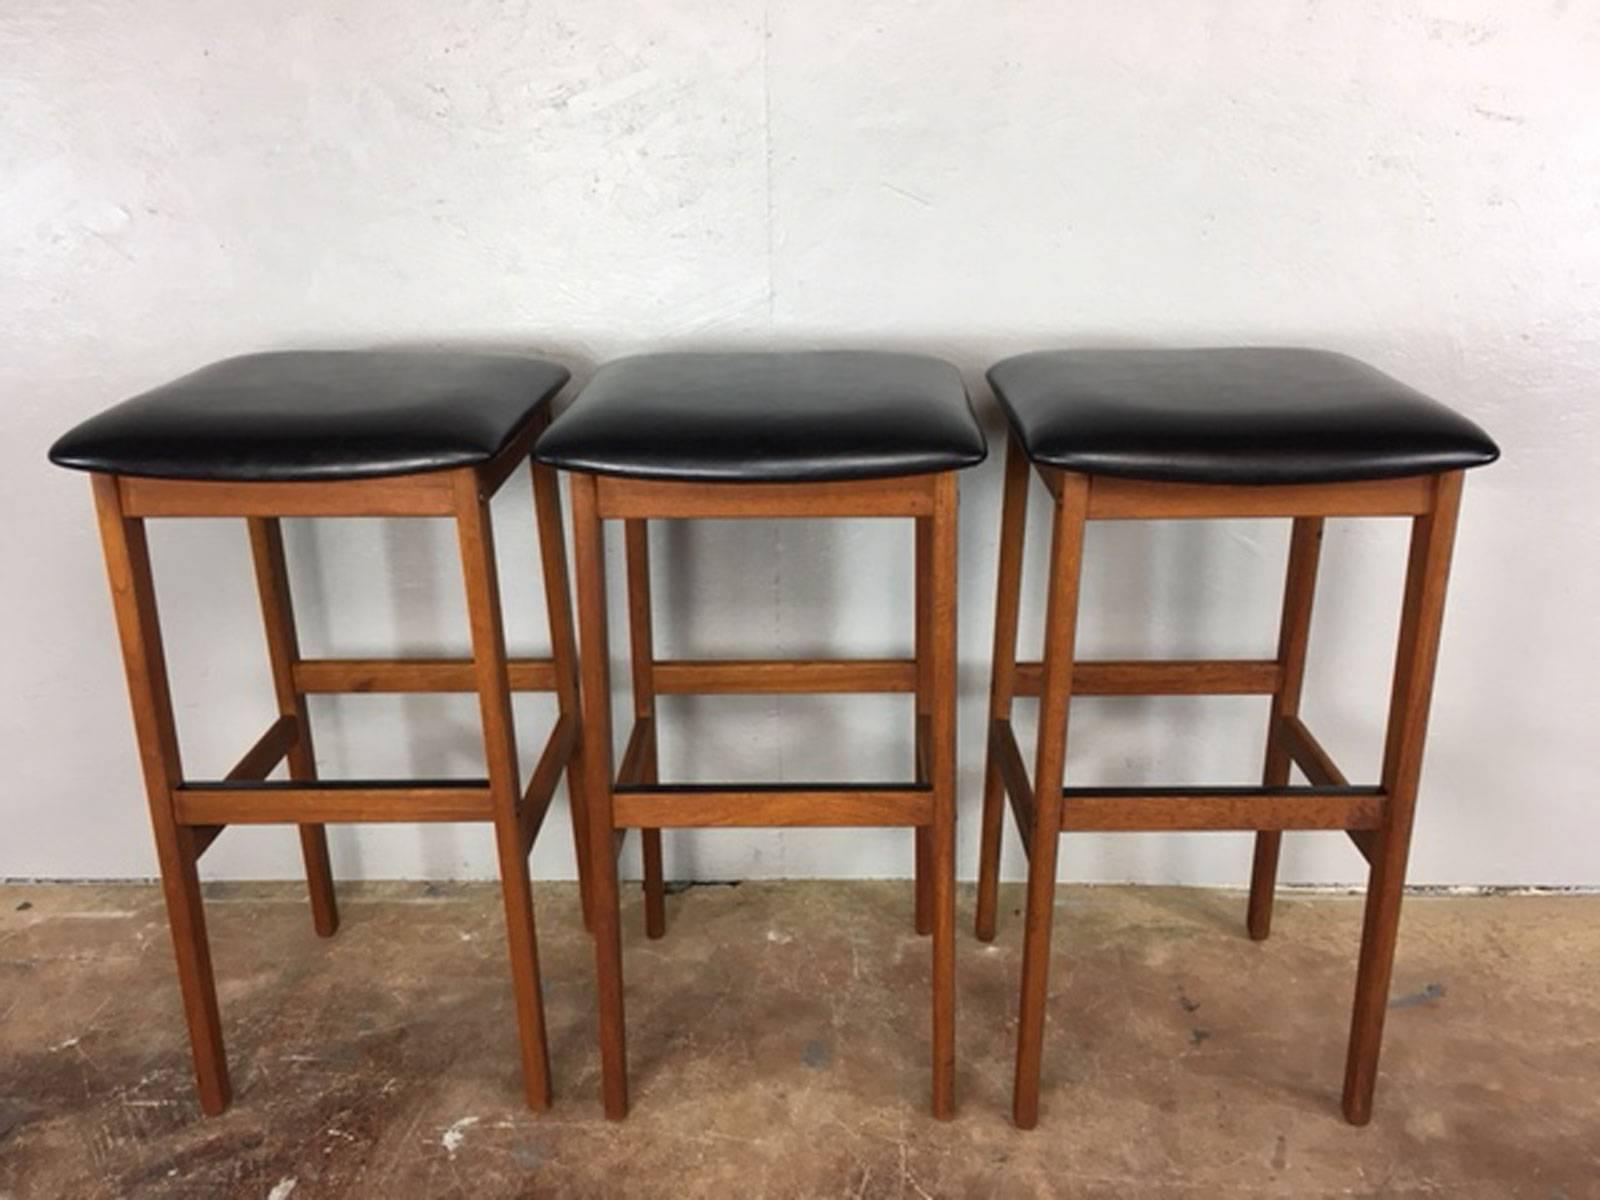 Nice set of three Danish bar stools in walnut and black leather. Marked "K.S.". Leather is in very good condition overall. As depicted, there is one small quarter inch square mar in the leather on one stool. The mar does not go through the